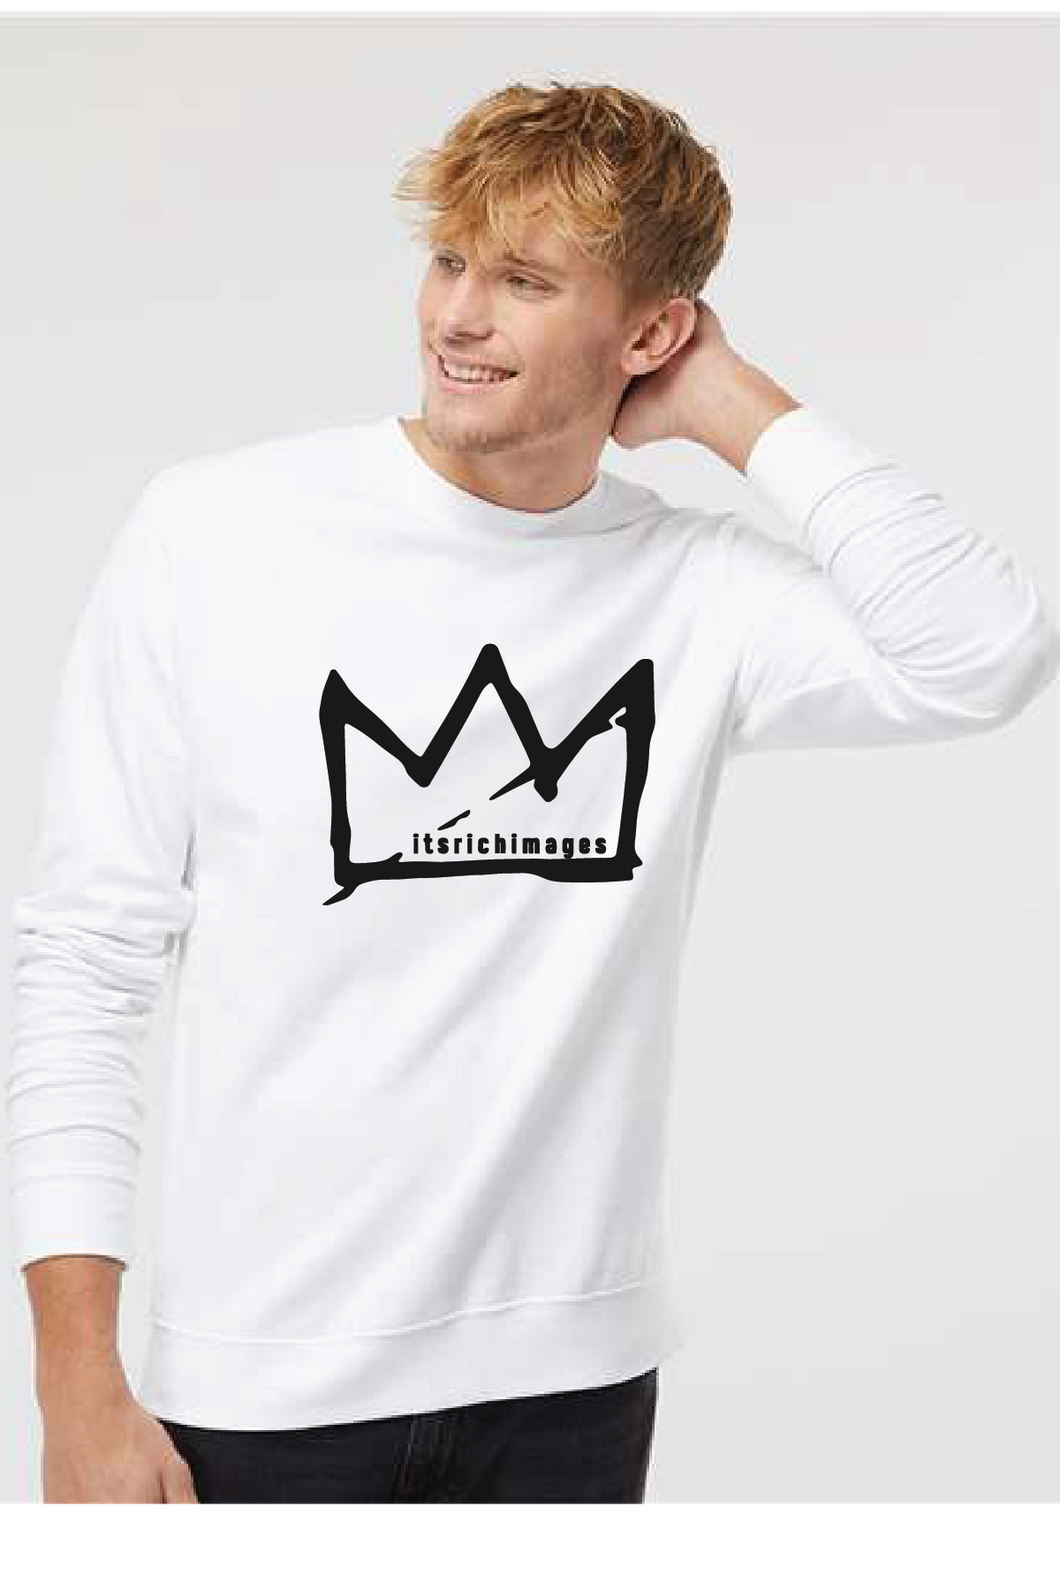 Midweight Crewneck Sweatshirt / White / Rich Images Photography